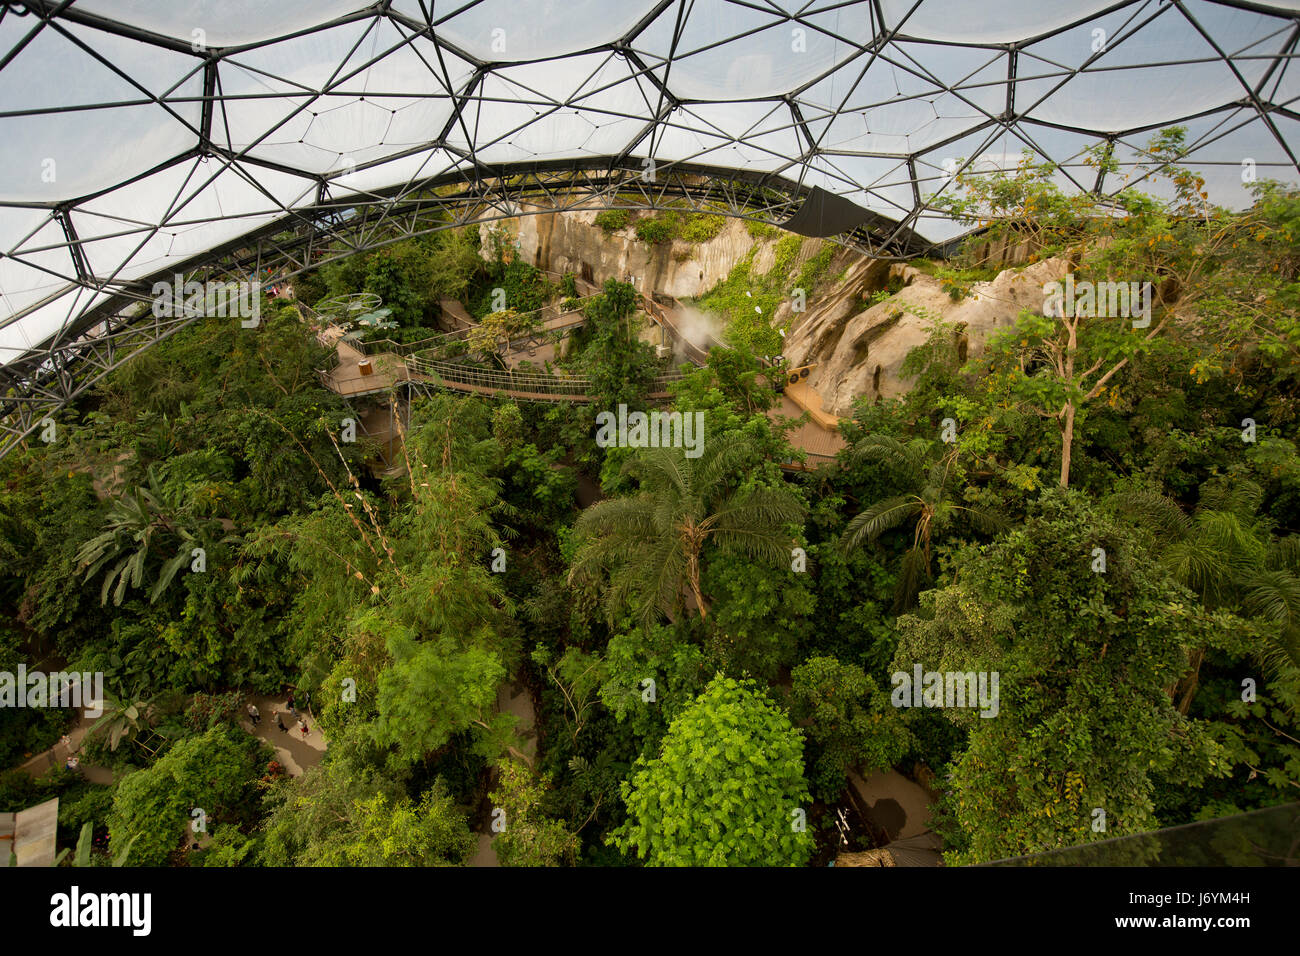 UK, Cornwall, St Austell, Bodelva, Eden Project, Rainforest Biome, wide angle view down from elevated platform Stock Photo